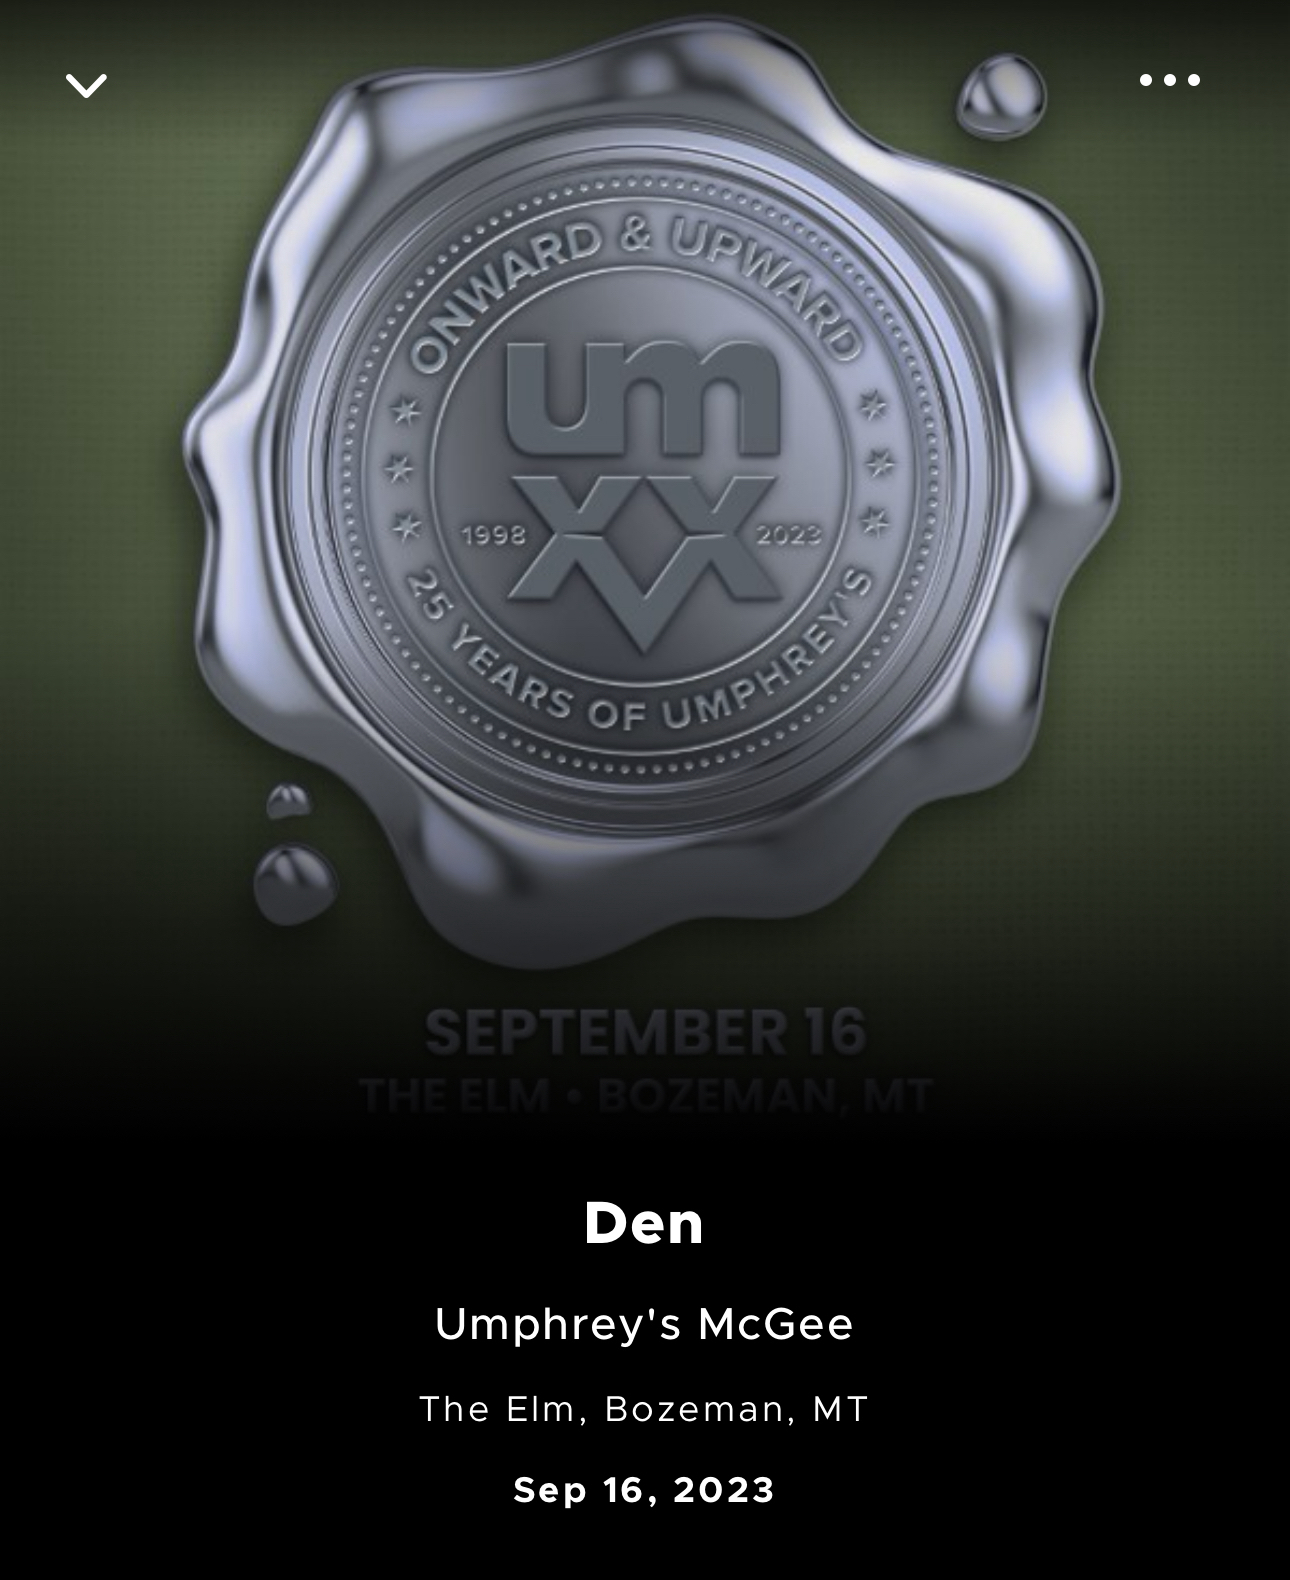 Graphic promoting Umphrey’s McGee with a seal commemorating “25 YEARS OF UMPHREY’S” for an event at The Elm in Bozeman, MT on September 16, 2023. The band logo and the